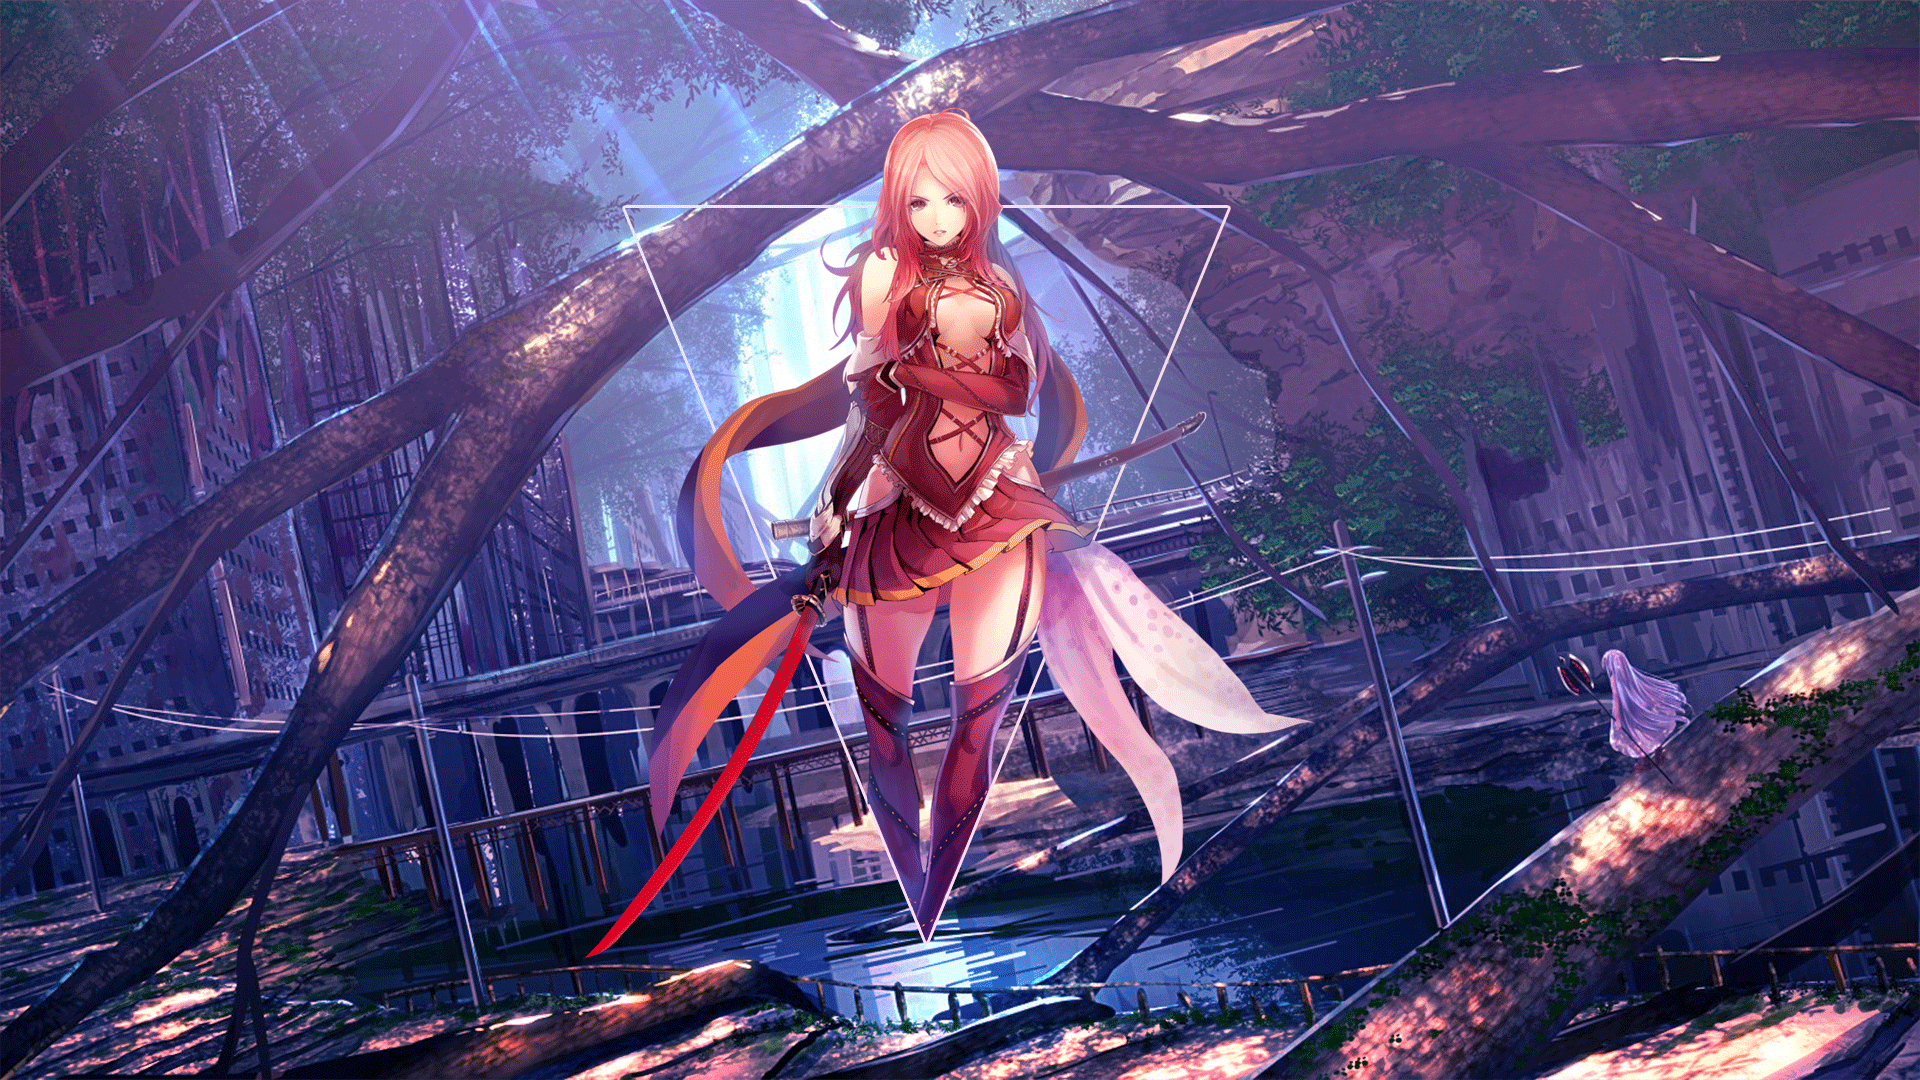 Anime Anime Girls Sword Katana Anime Landscape Photoshop Digital Art Picture In Picture Background A 1920x1080